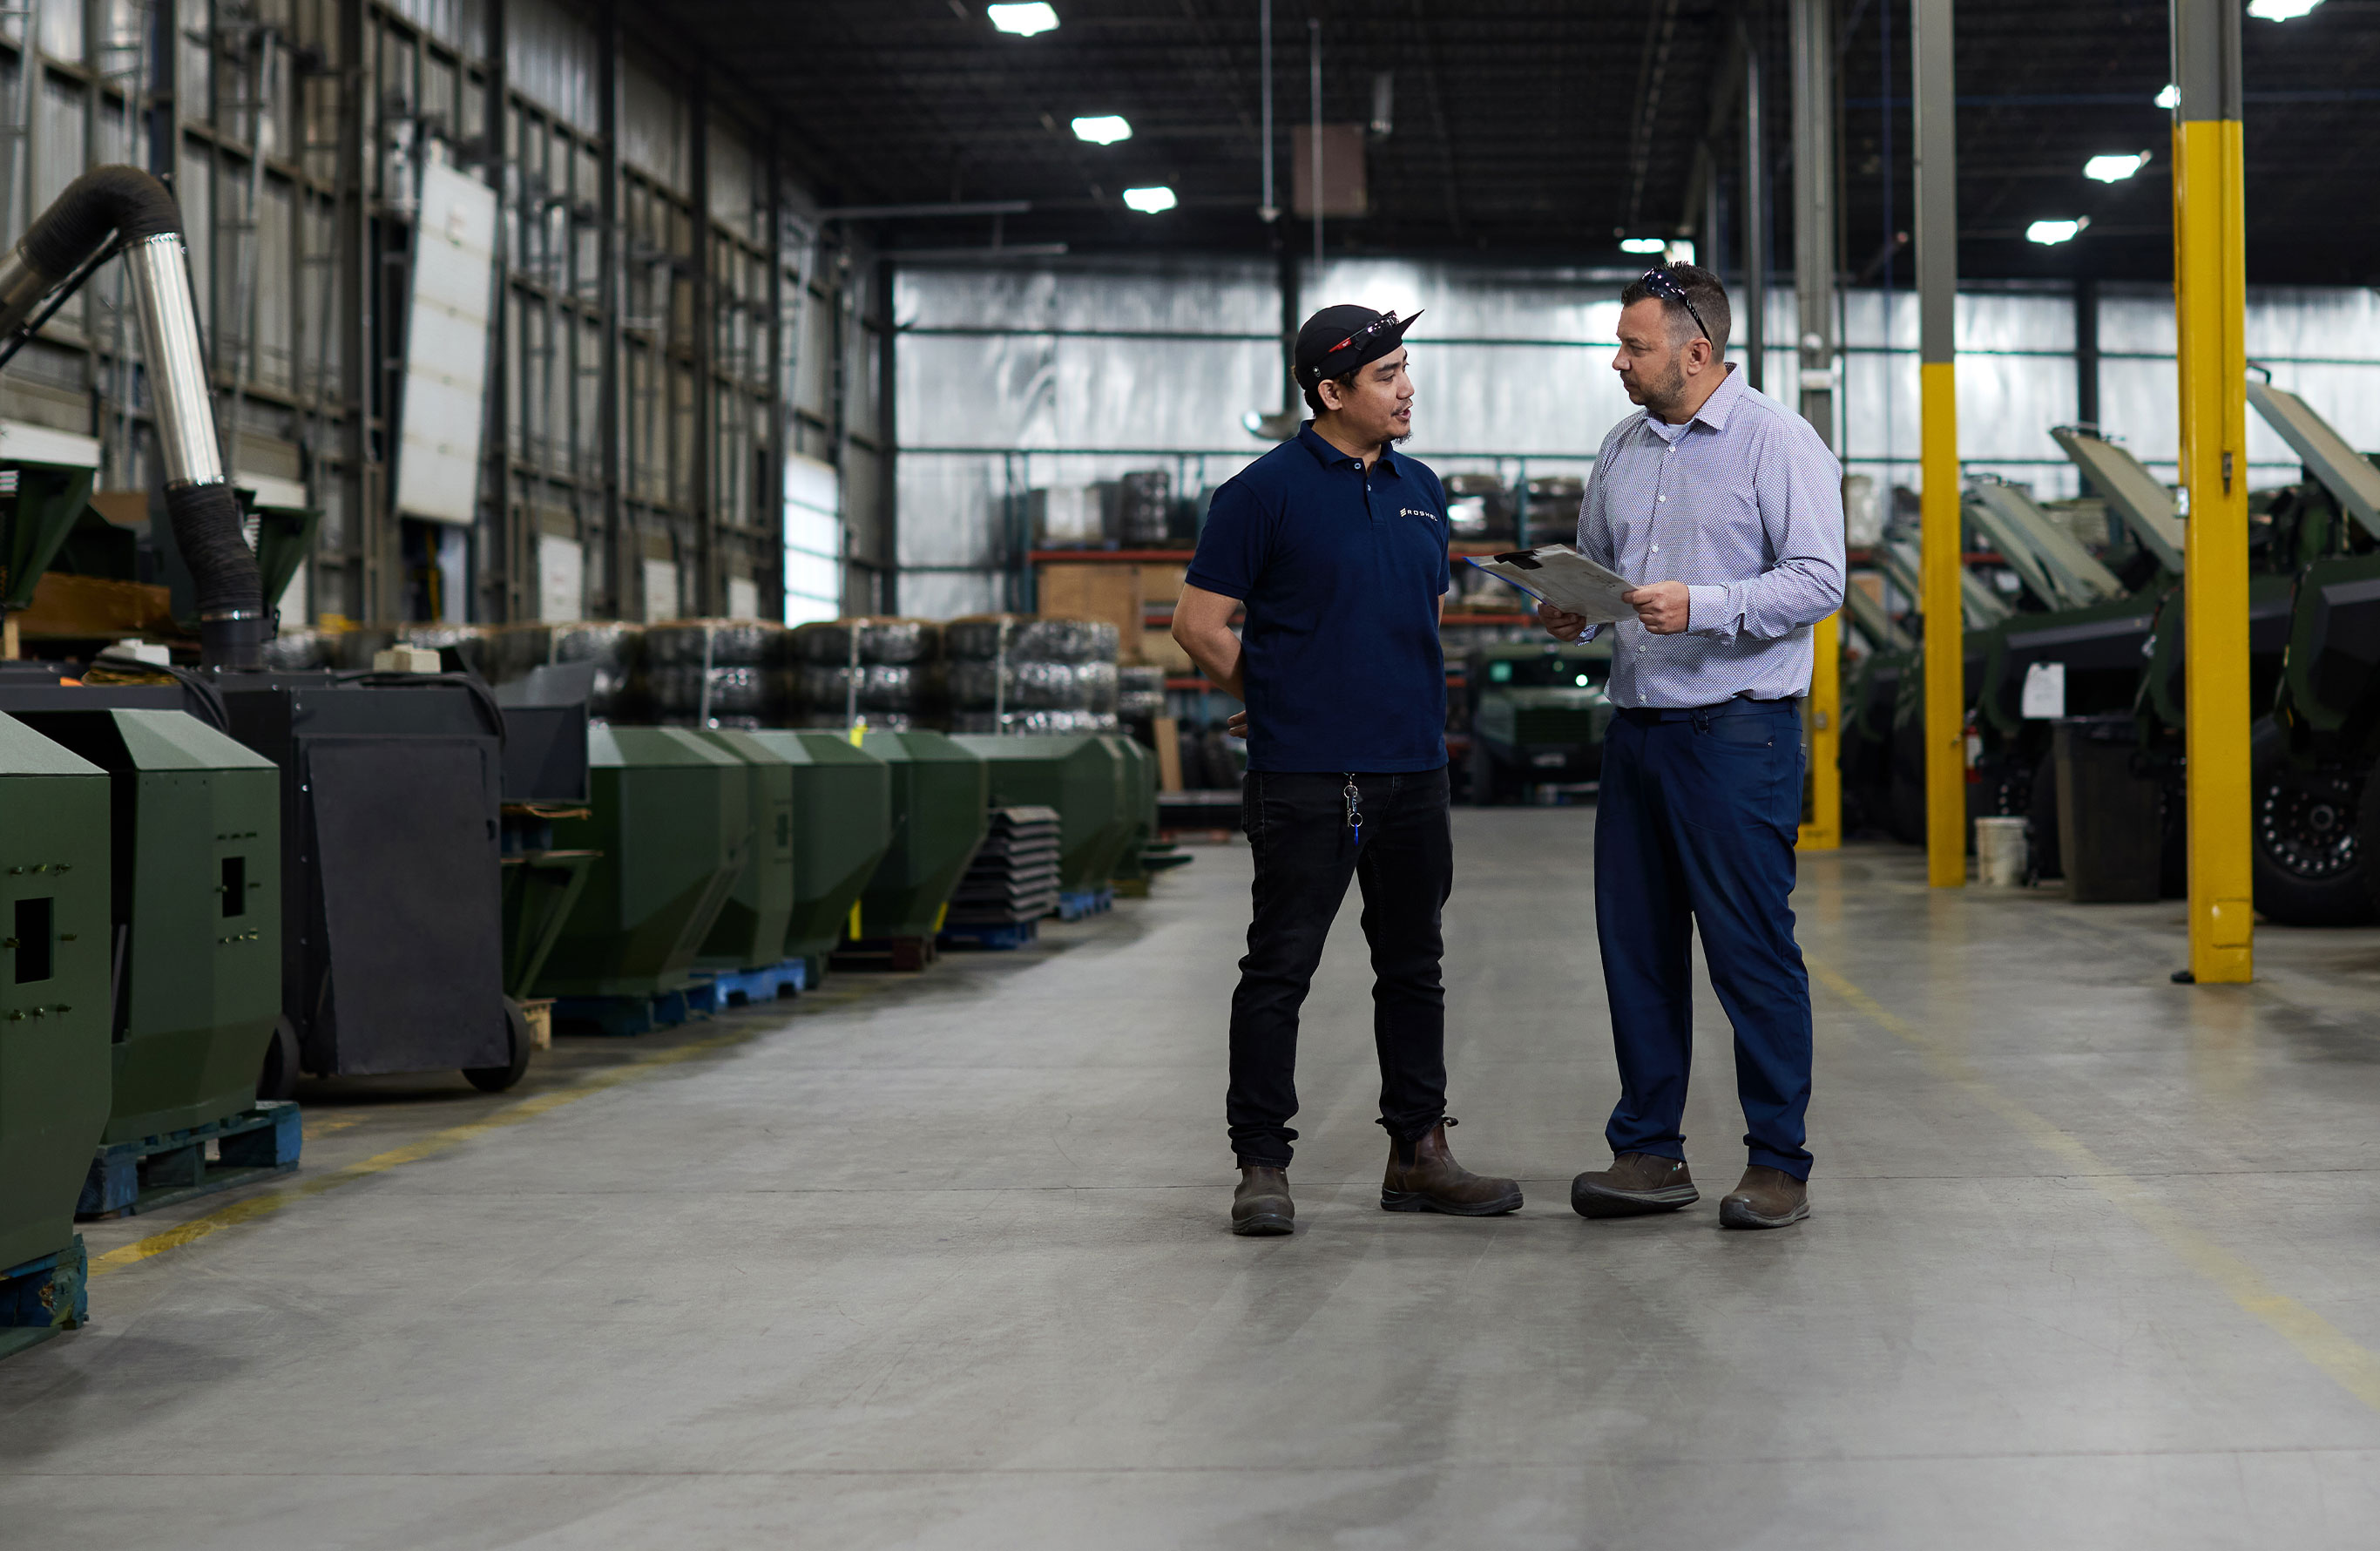 Header Image. Factory floor with two male workers talking